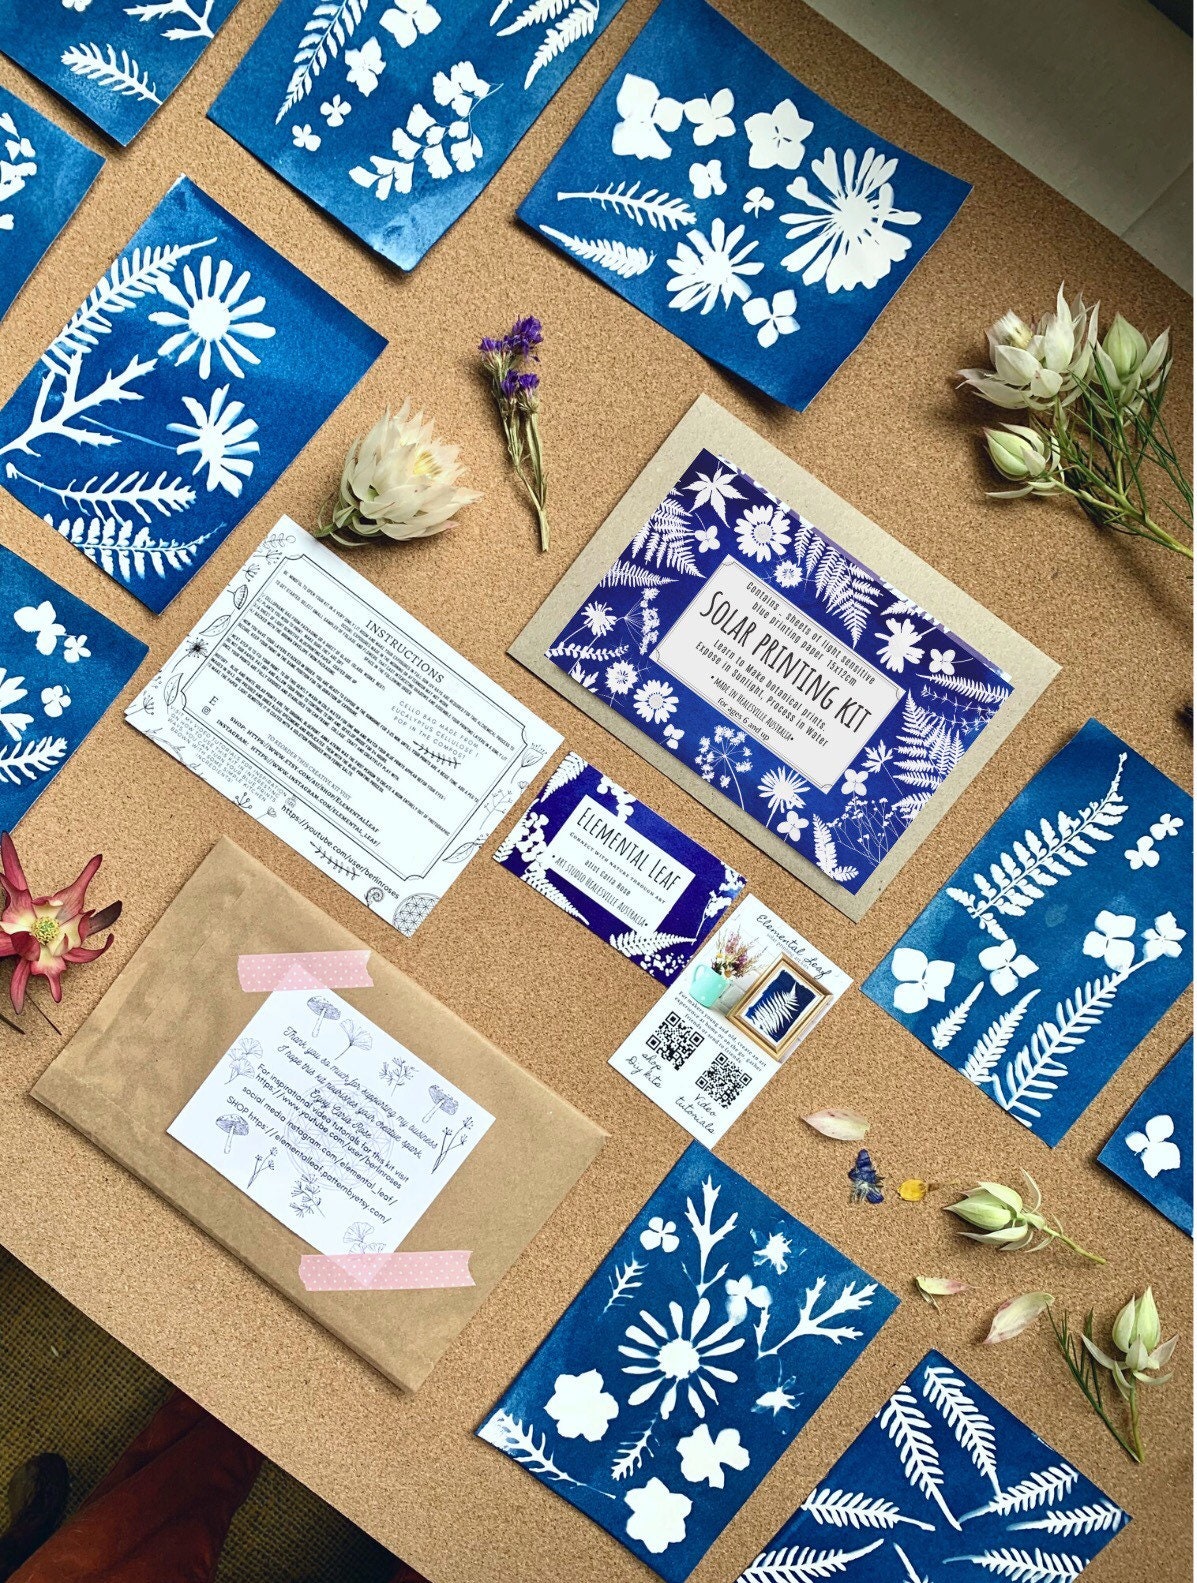 Party Favours , Min Cyanotype Kit , Corporate Gifts , Stocking Stuffer, Mini  Art Kit , Party Favors for Kids, Party Pack , Mini Cyanotype 